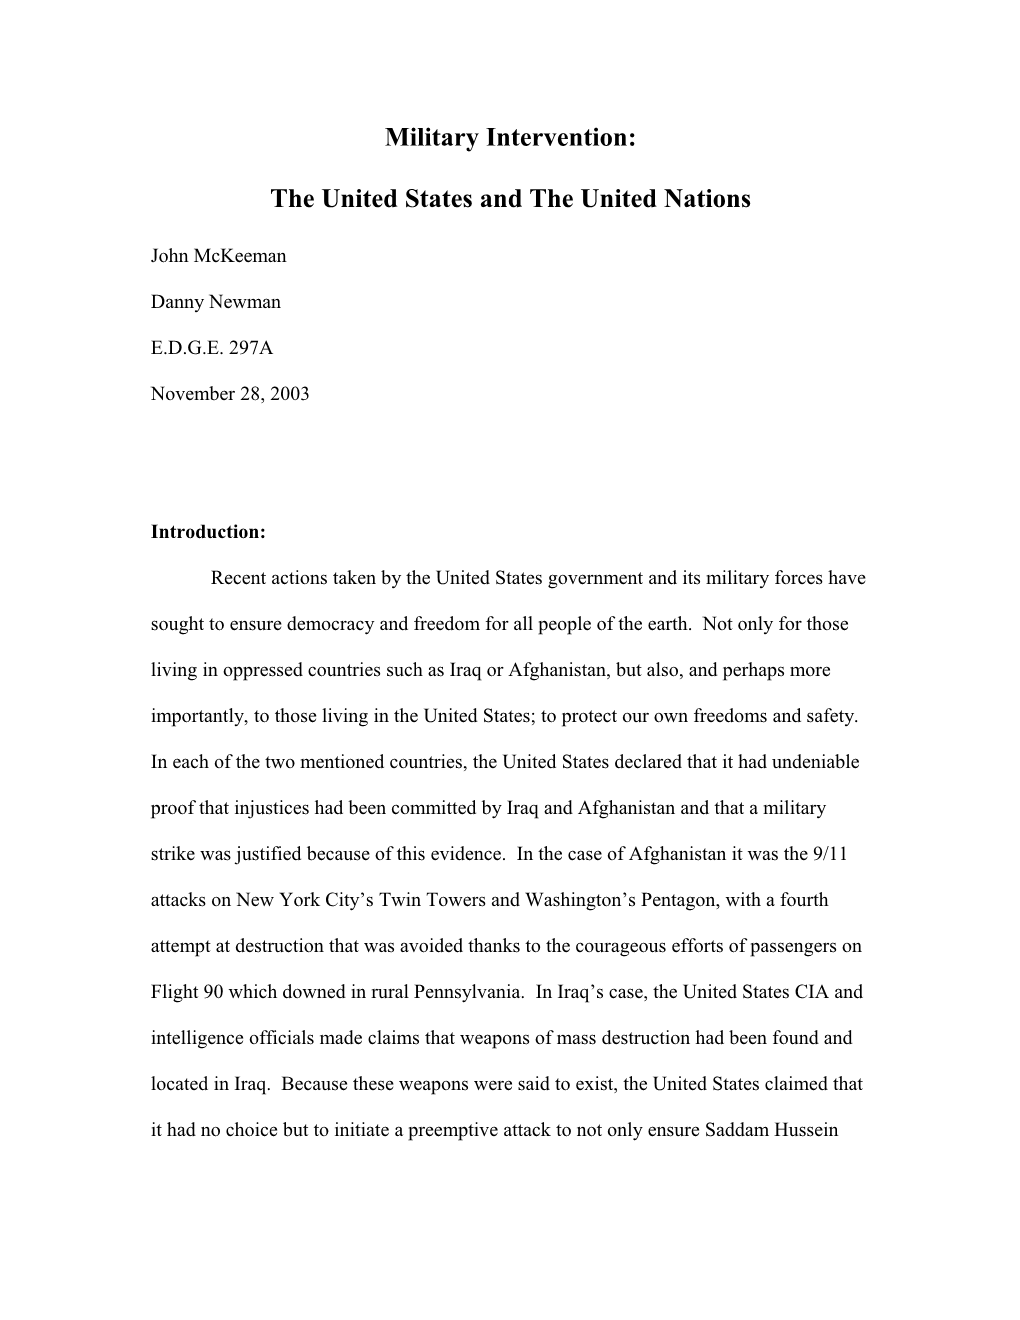 The United States and the United Nations